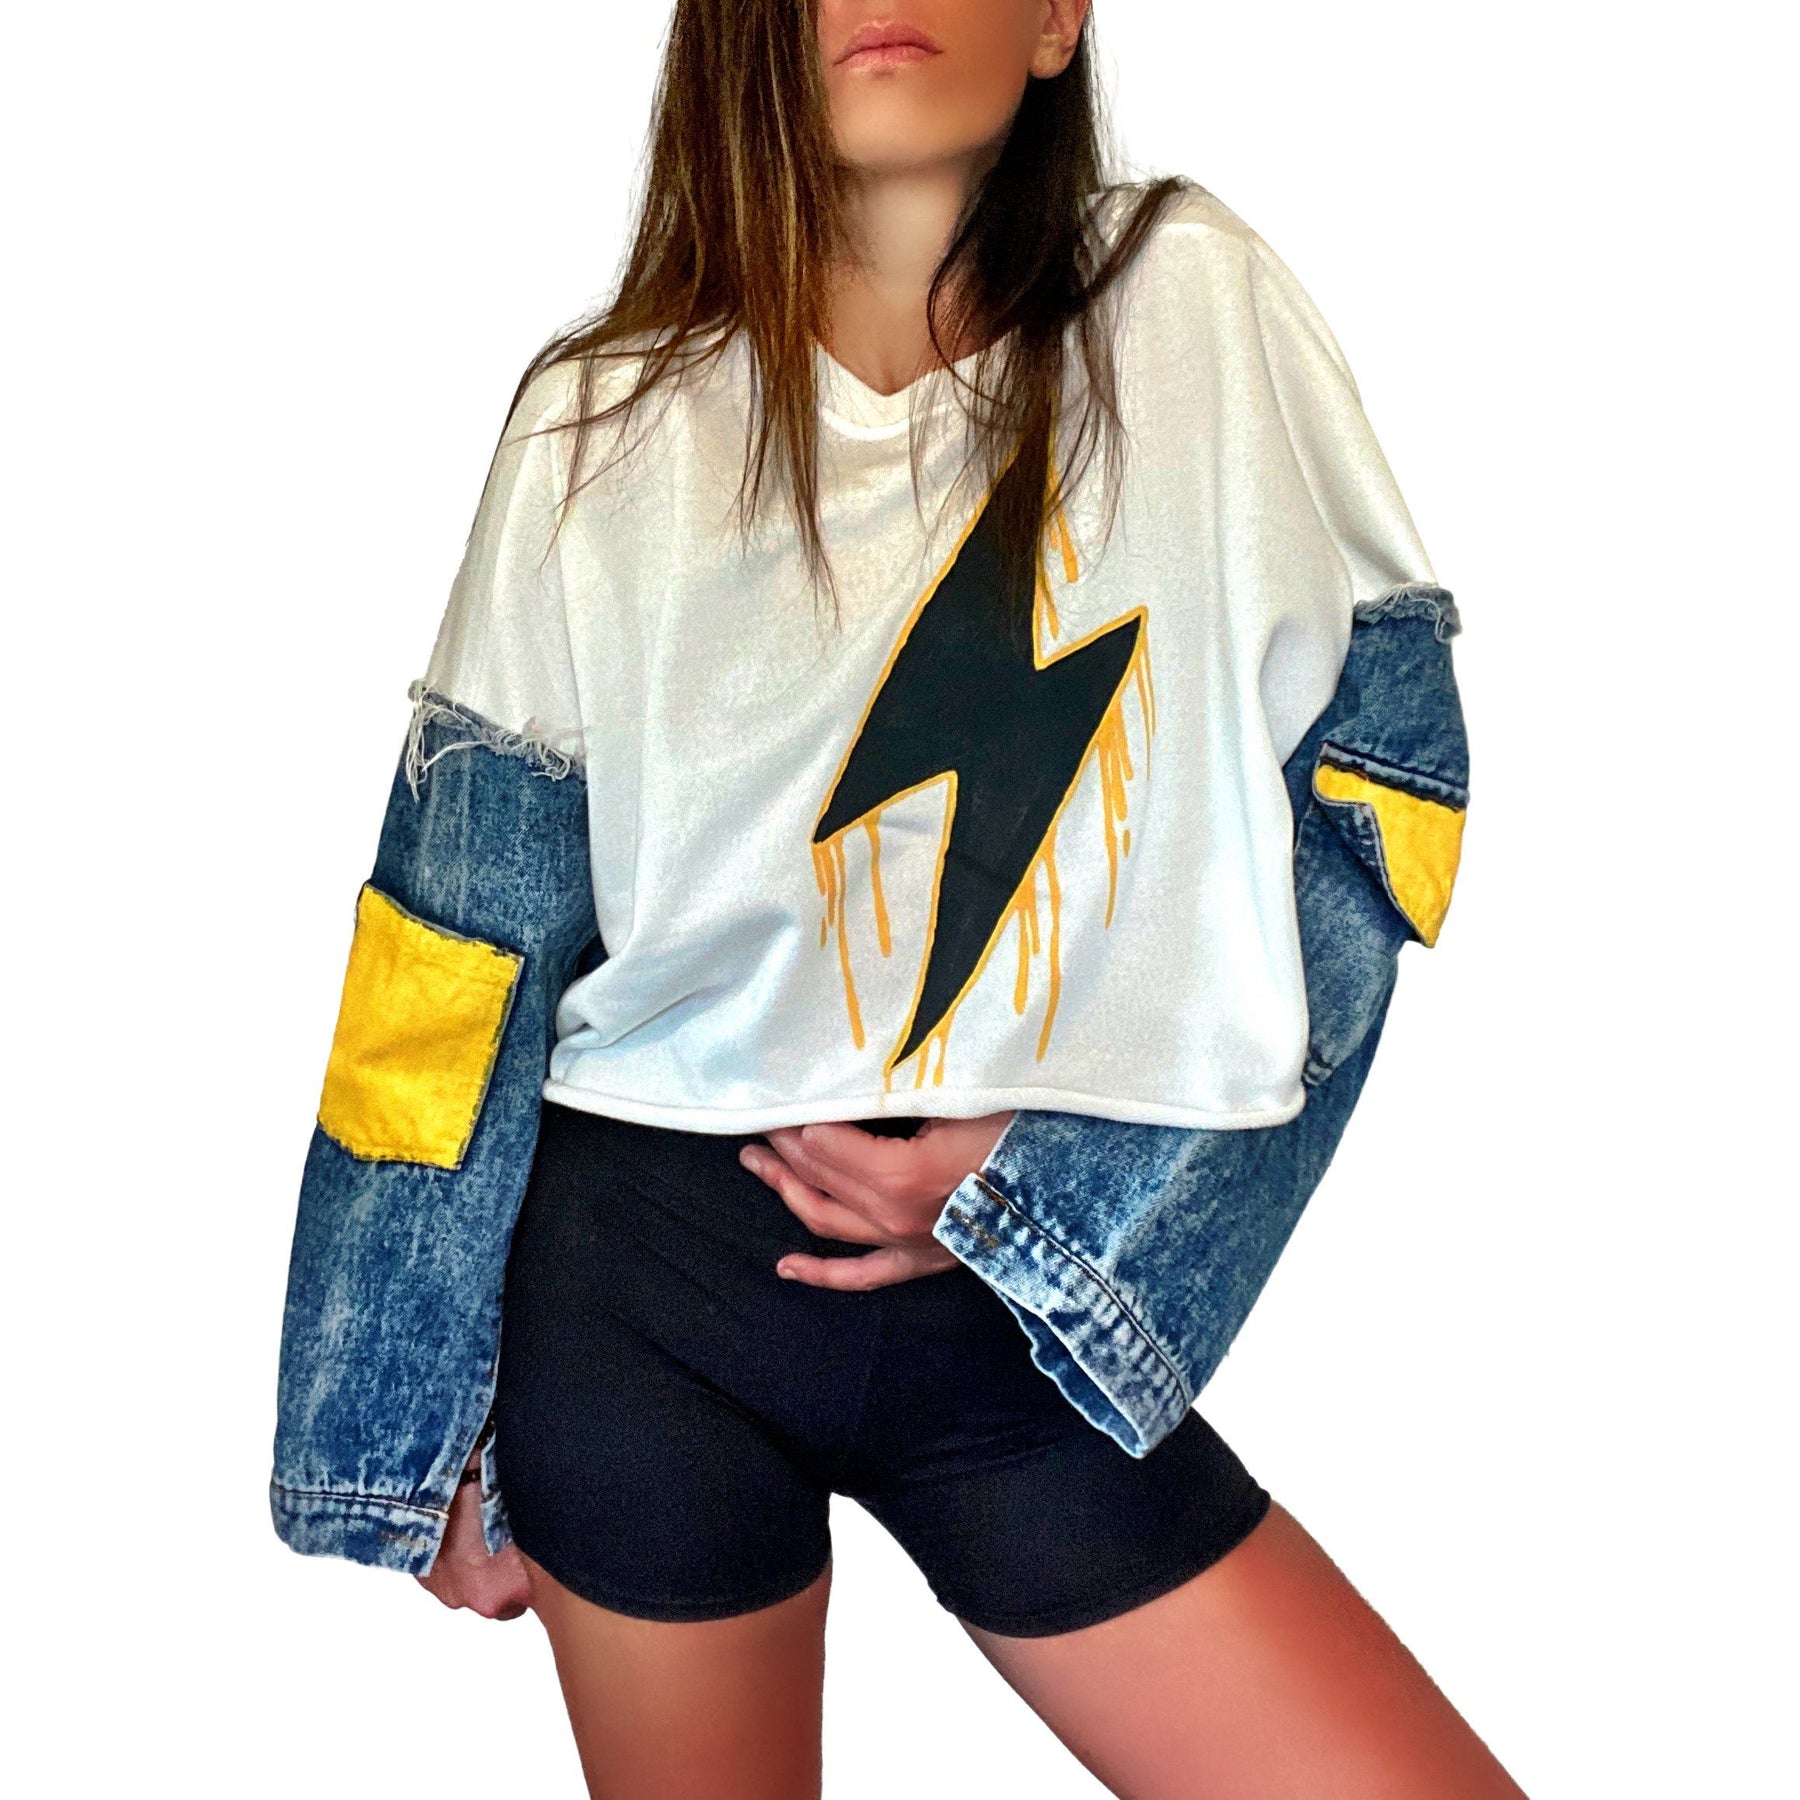 Cropped sweatshirt with denim sleeves. Large lightning painted in black, with yellow drip effect. Yellow painted on pockets on sleeves. Lightning side can be worn on the front or on the back. Signed @wrenandglory.